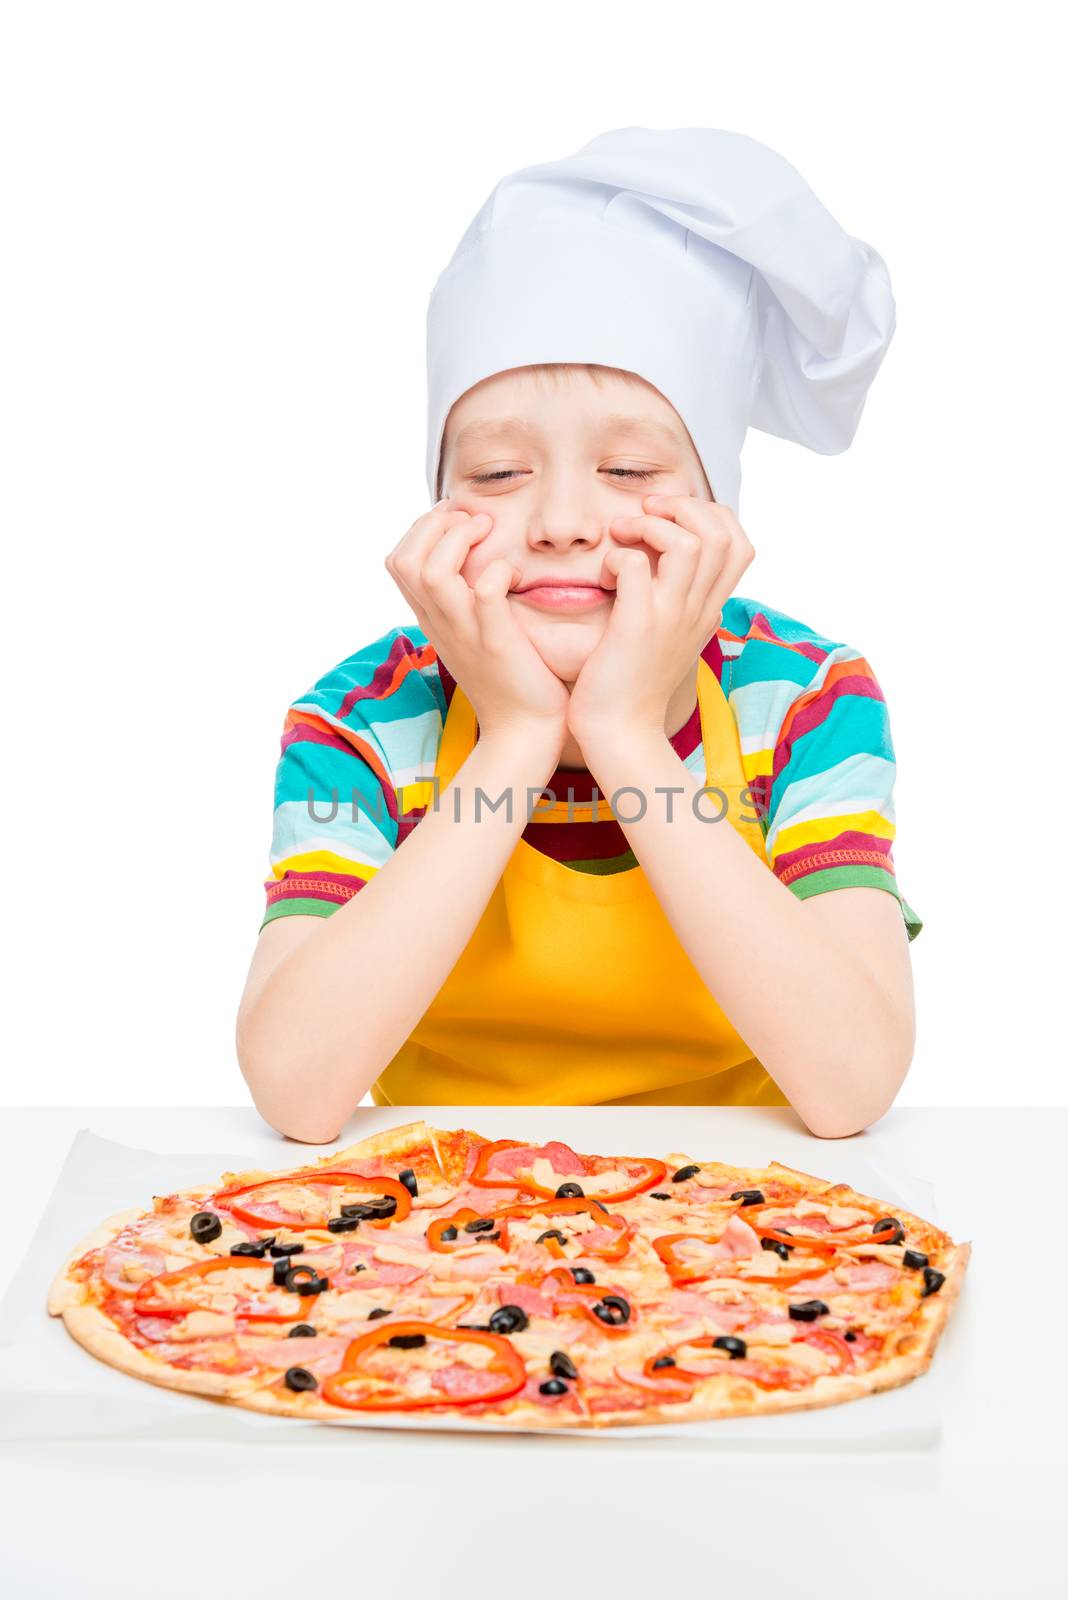 cook with homemade pizza, boy 10 years old, portrait on white ba by kosmsos111